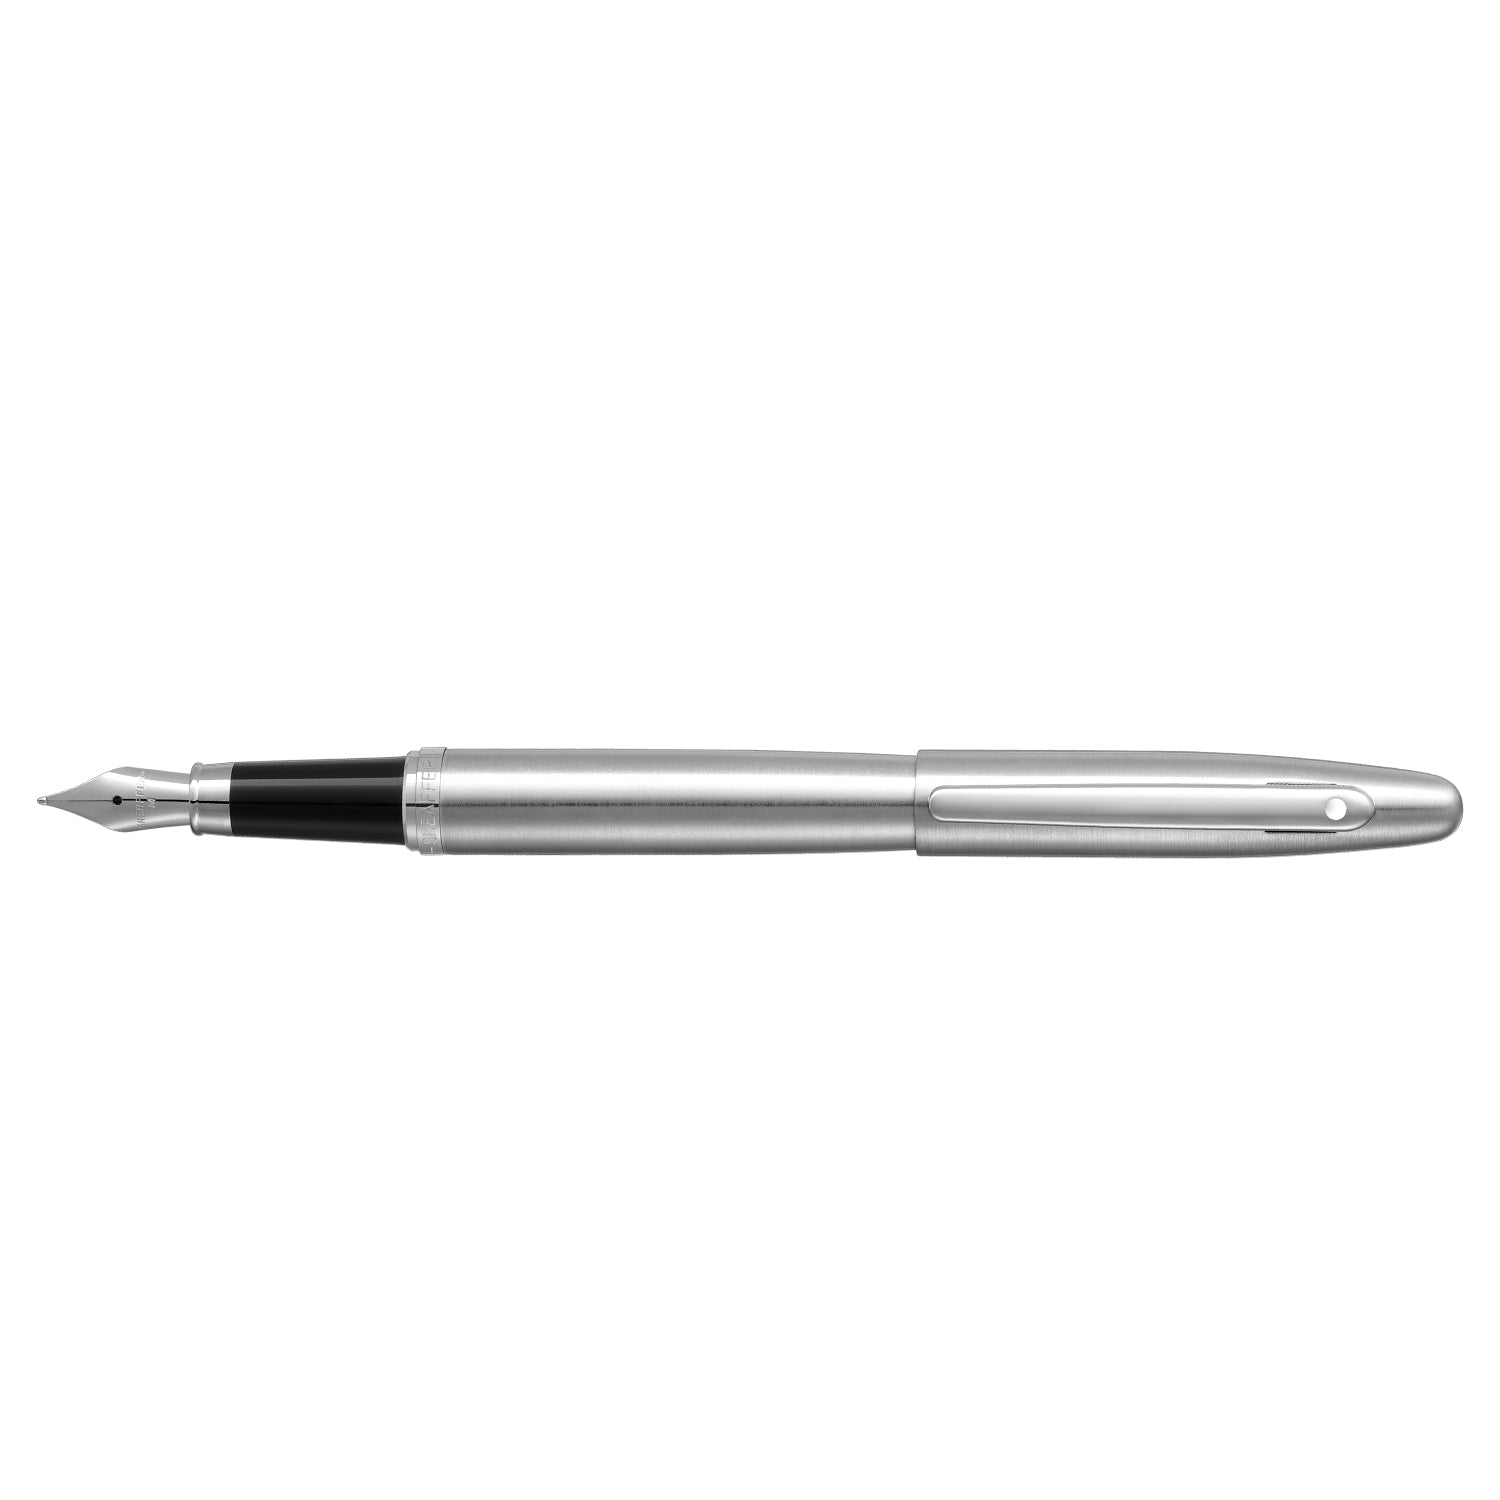  Sheaffer Intensity Violet/Chrome Medium Fountain and Ballpoint  Pen Set 9232 : Office Products